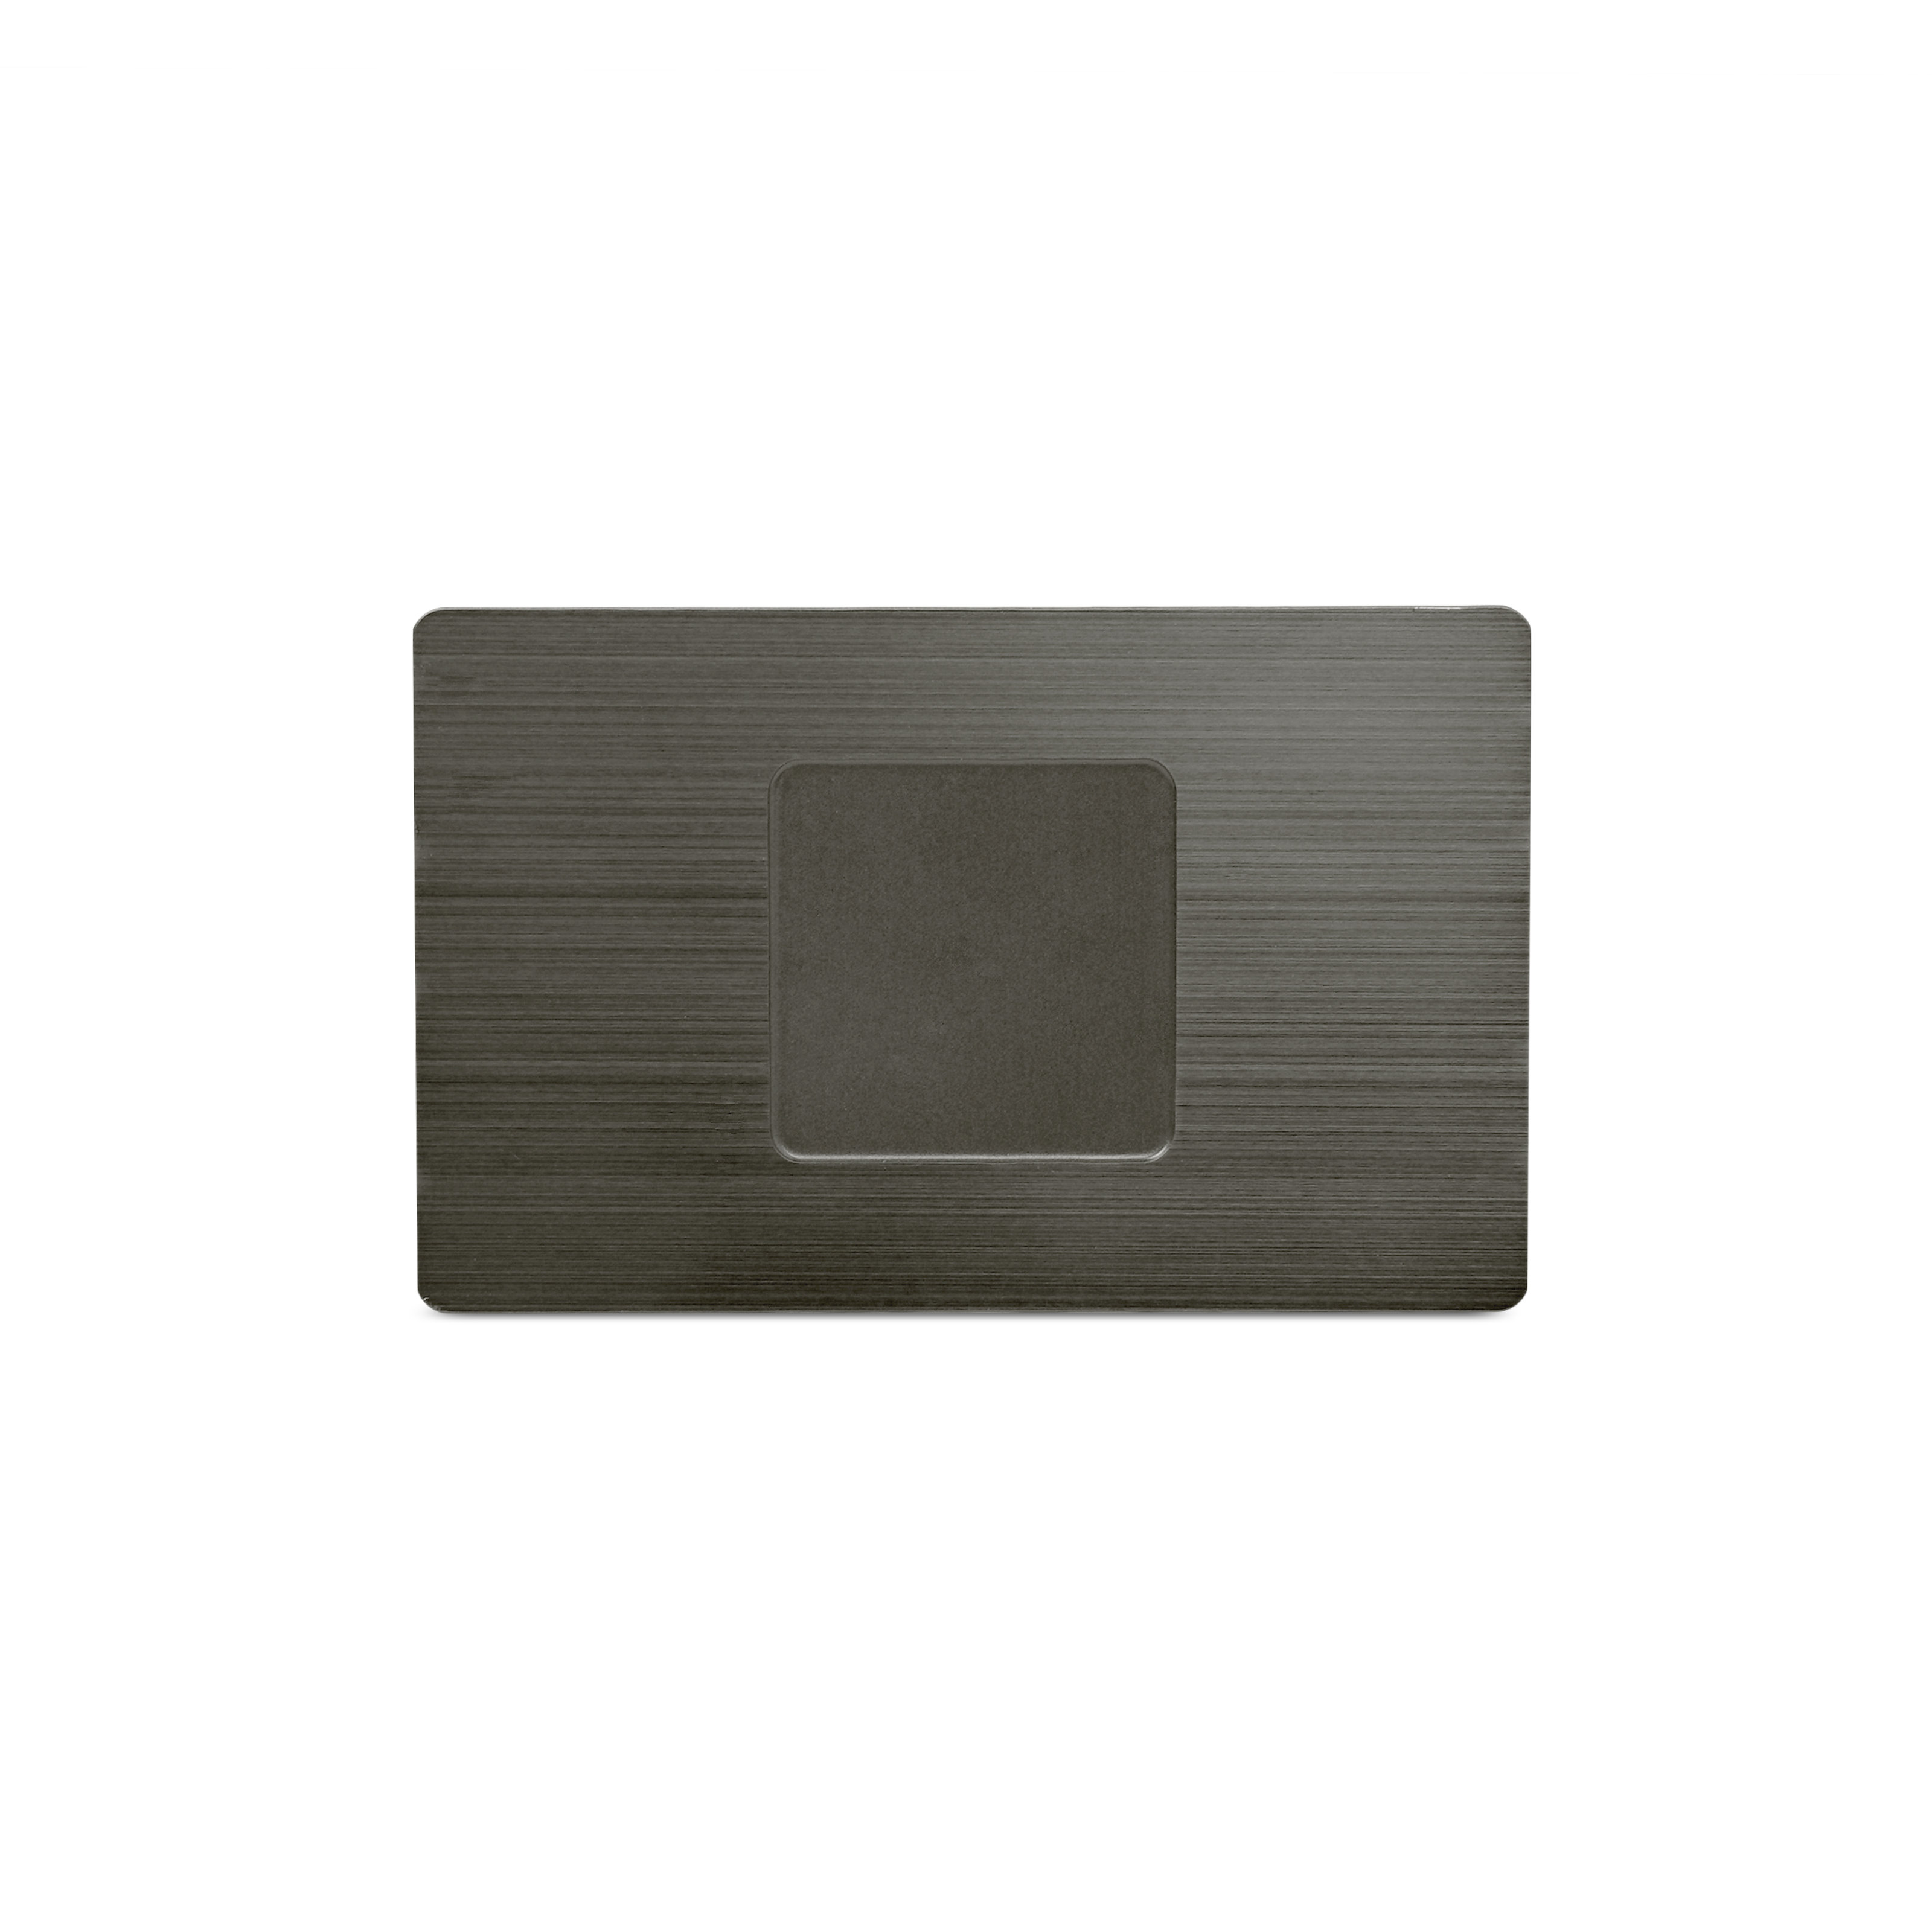 NFC-vCard - Digital business card - incl. NFC-vCard access - metal - 85.6 x 54 mm - anthracite with engraving